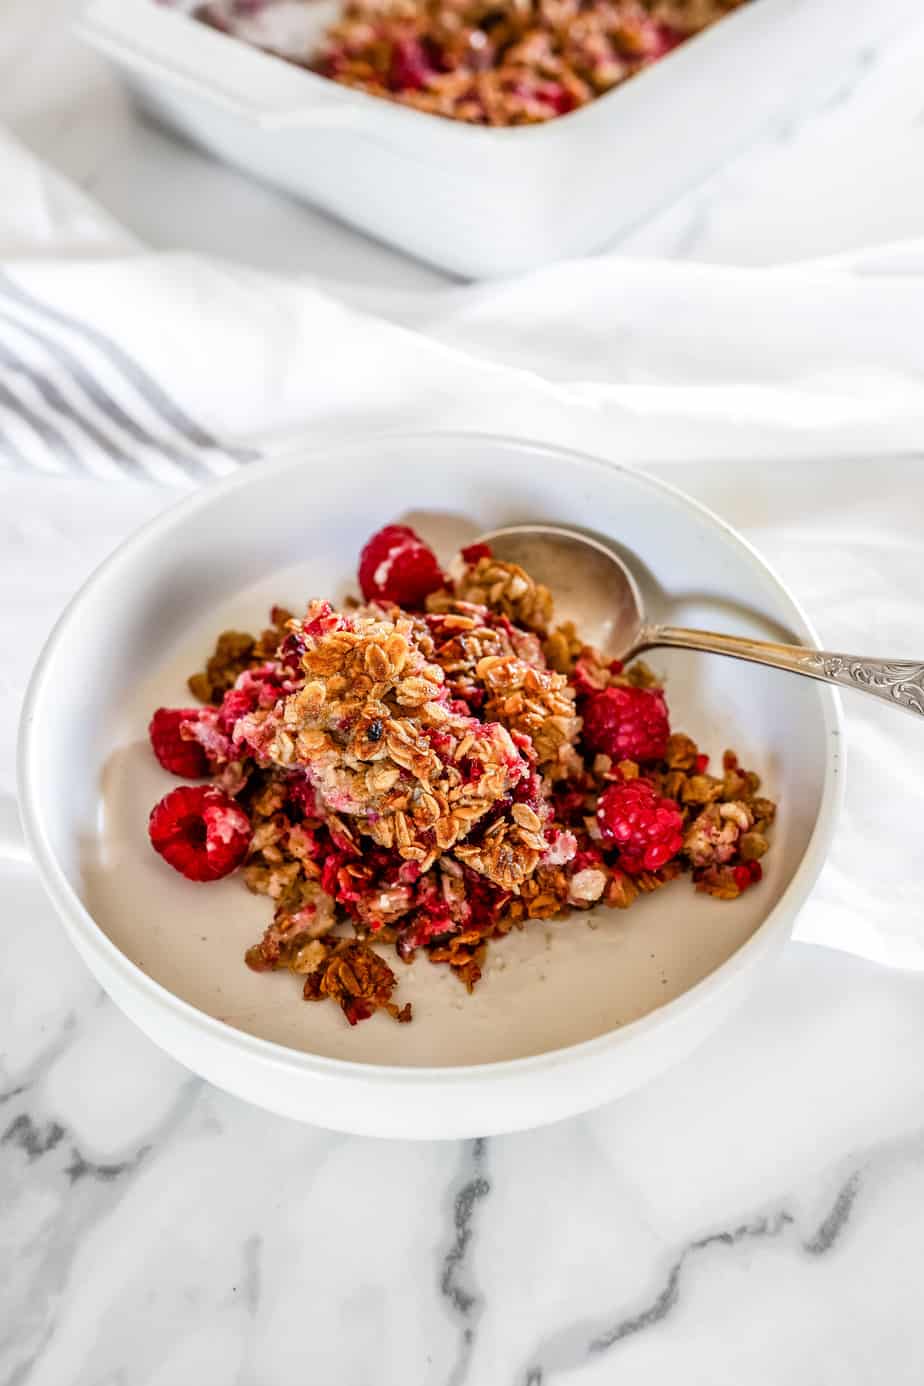 A white bowl of raspberry baked oats with a silver spoon.